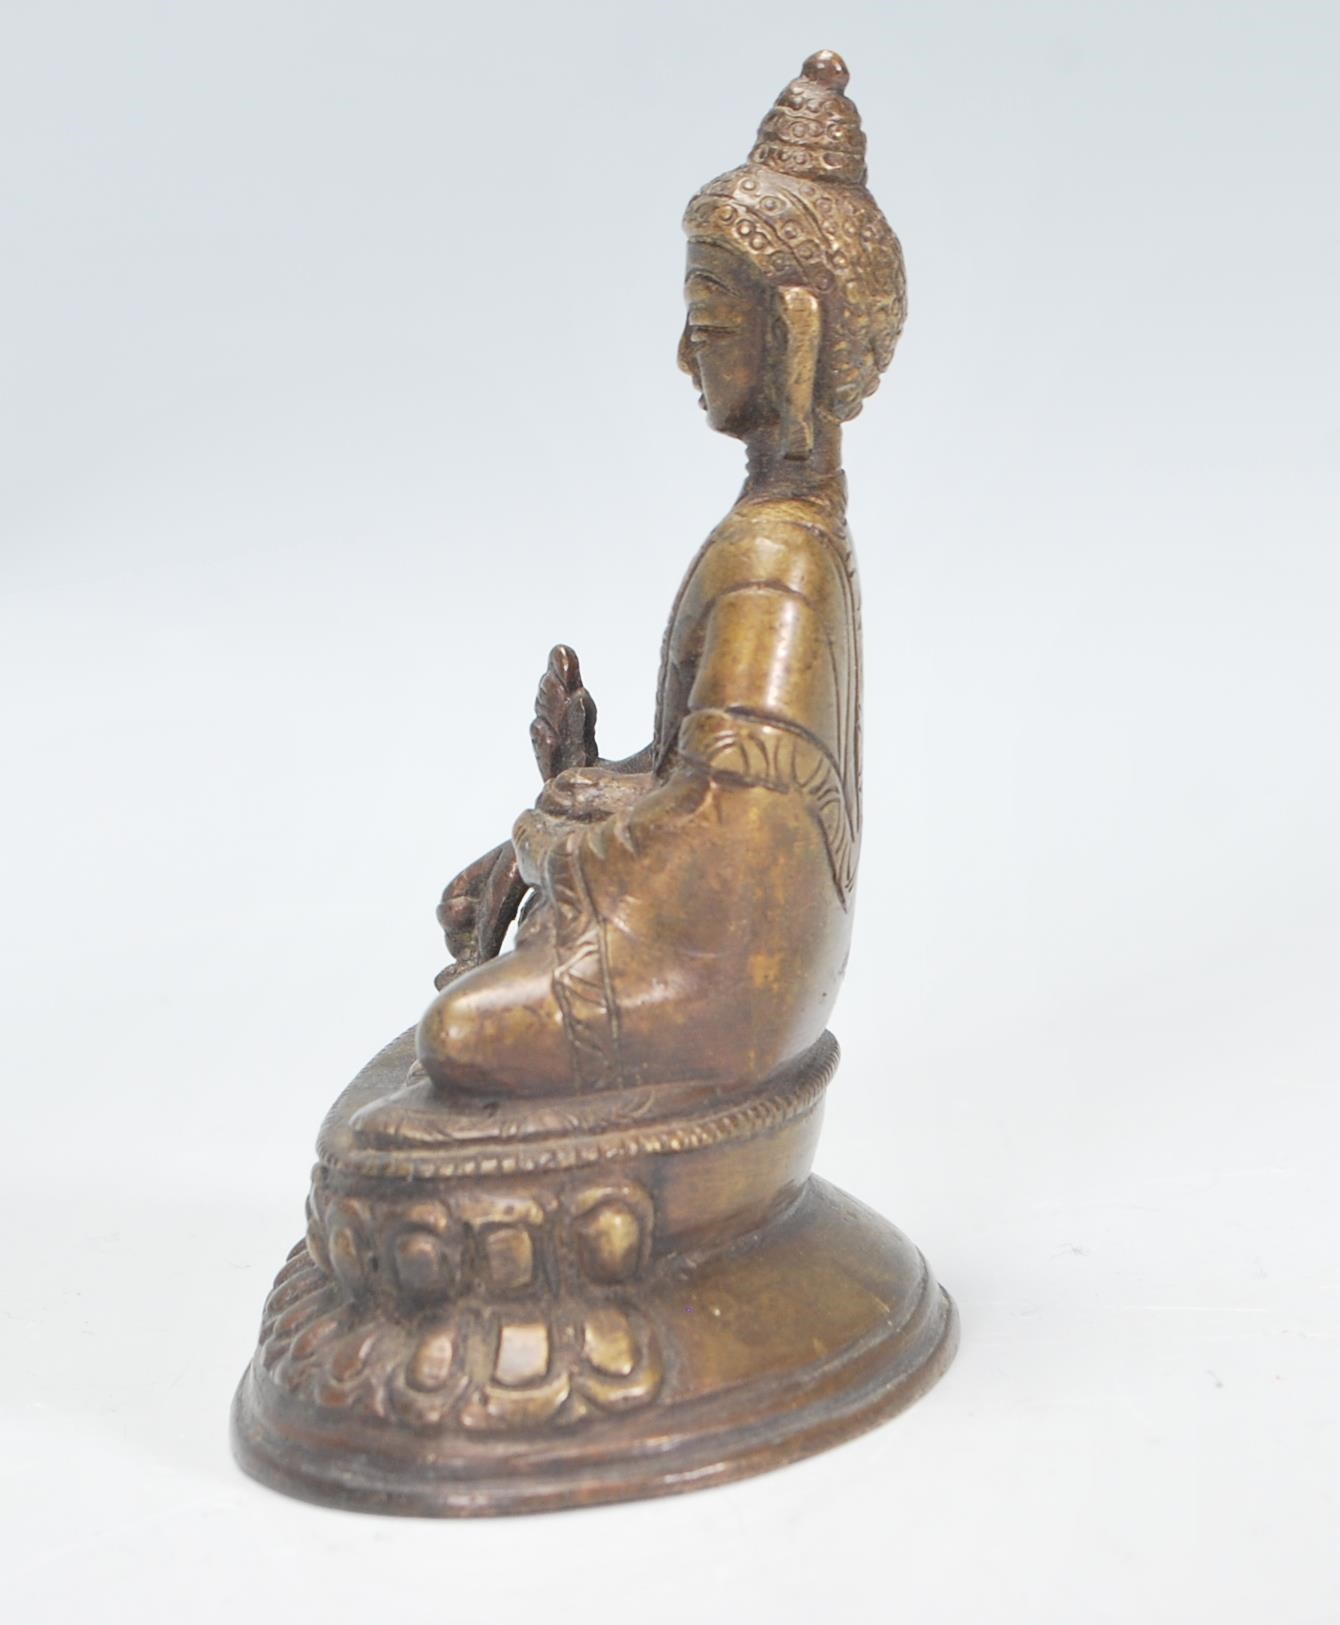 An Indian bronze figurine / ornament in the form of Buddha, modelled in a seated position raised - Image 4 of 6